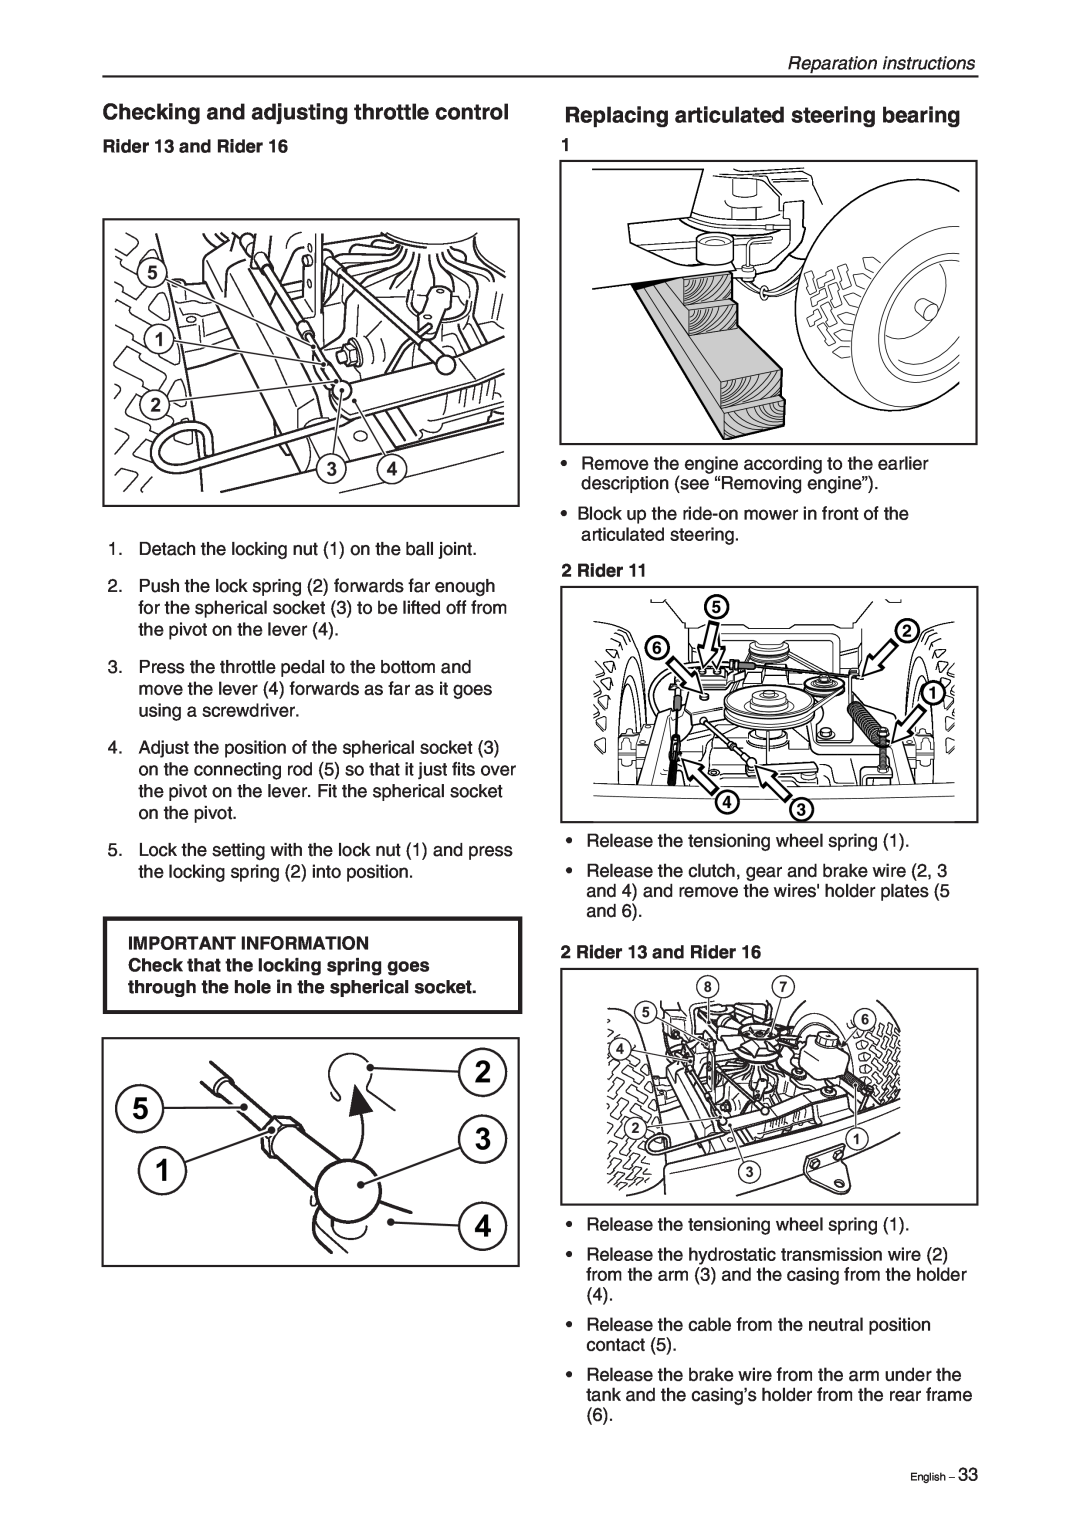 Briggs & Stratton RIDER 11 manual Checking and adjusting throttle control, Replacing articulated steering bearing, Rider 